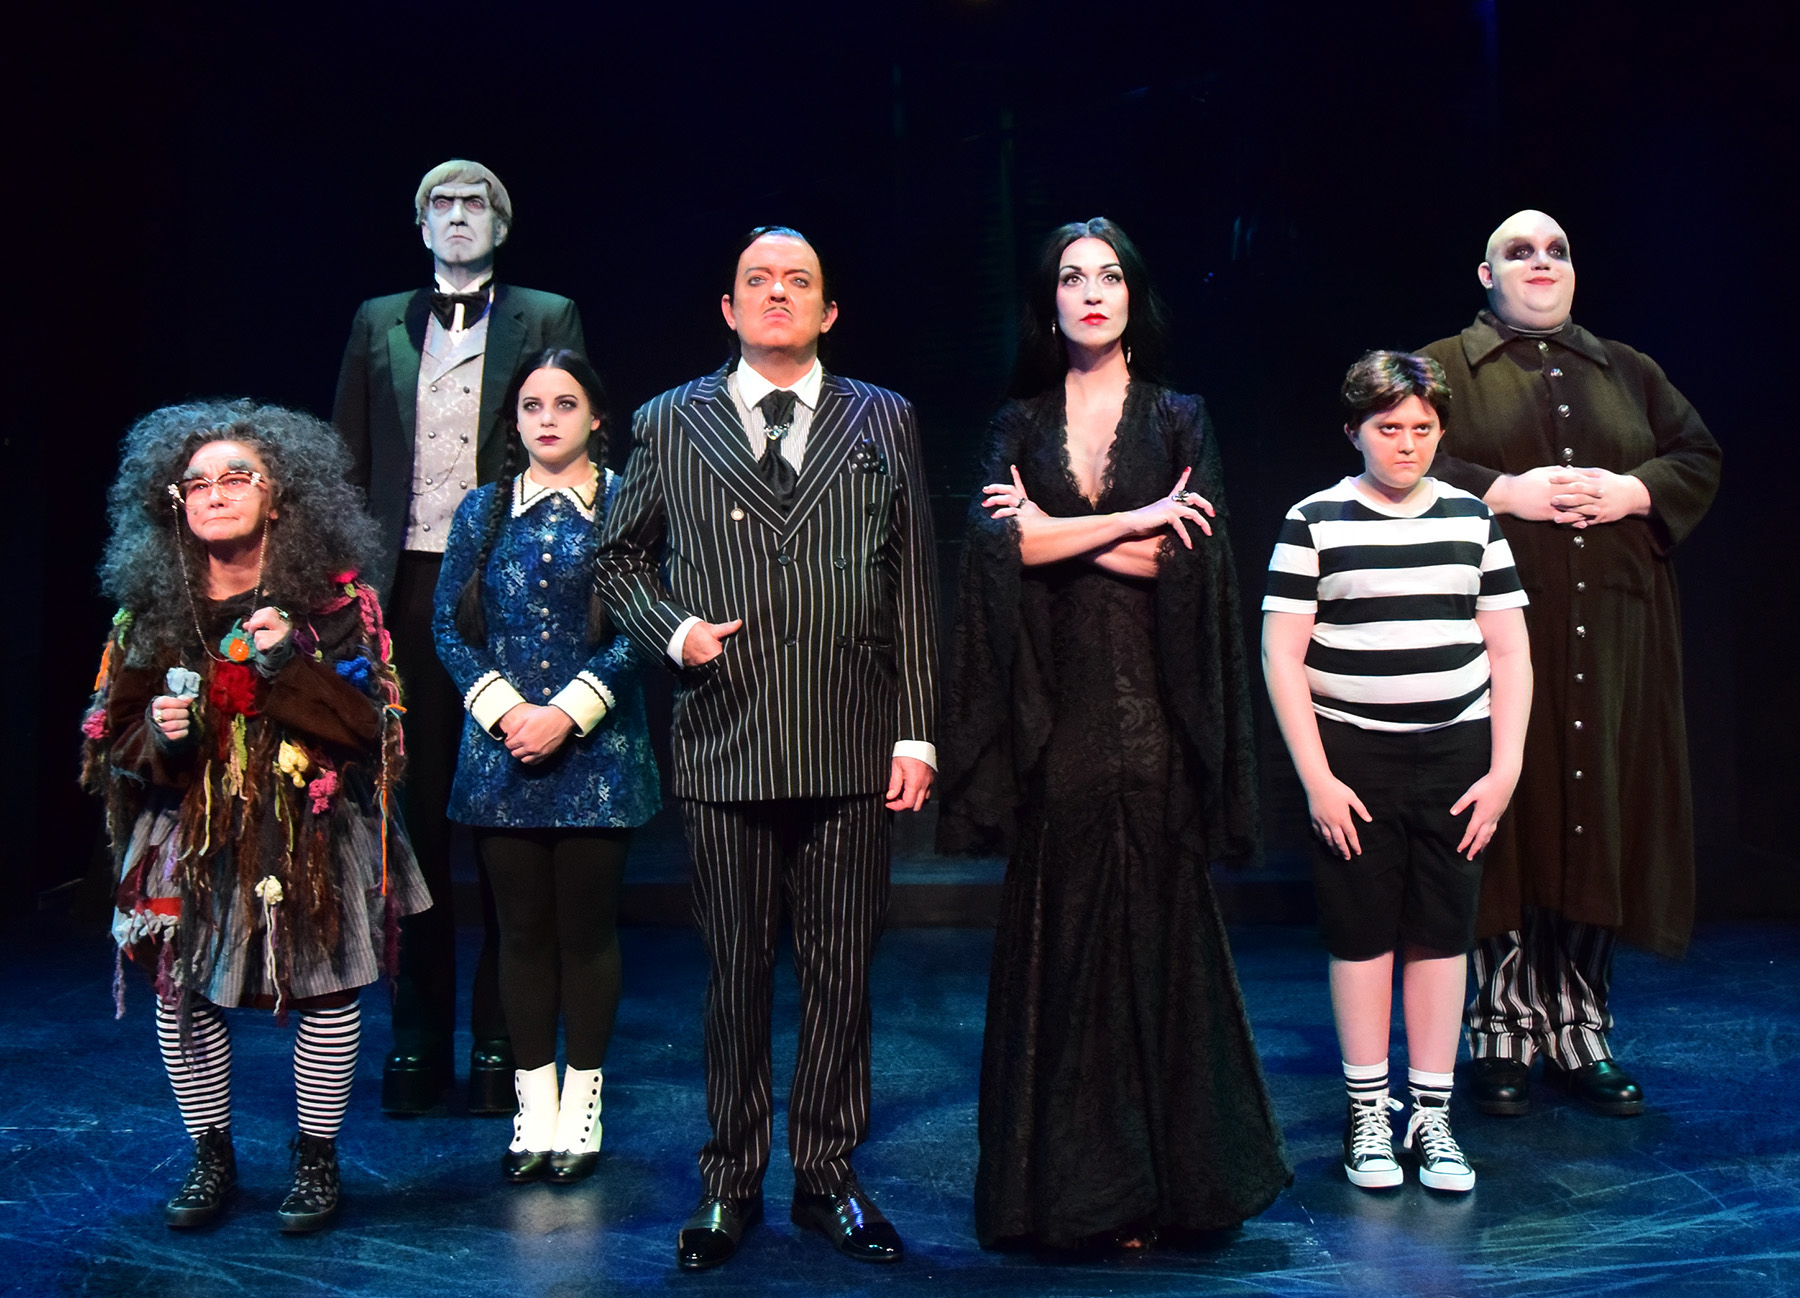 The Addams Family cast